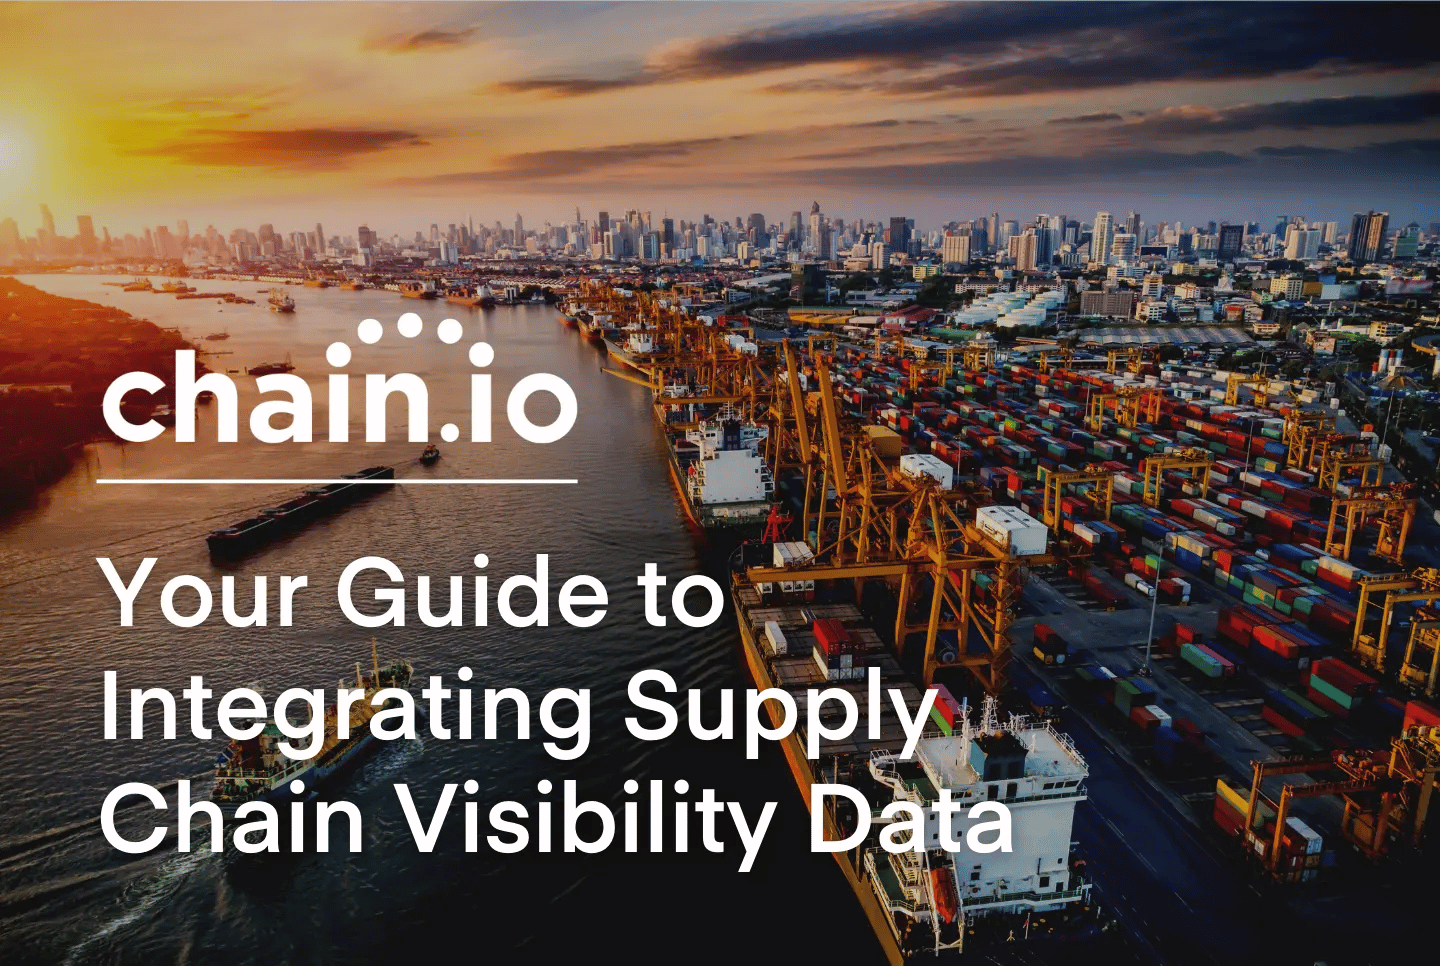 Port and ships in background, text with title "your guide to integrating supply chain visibility data"